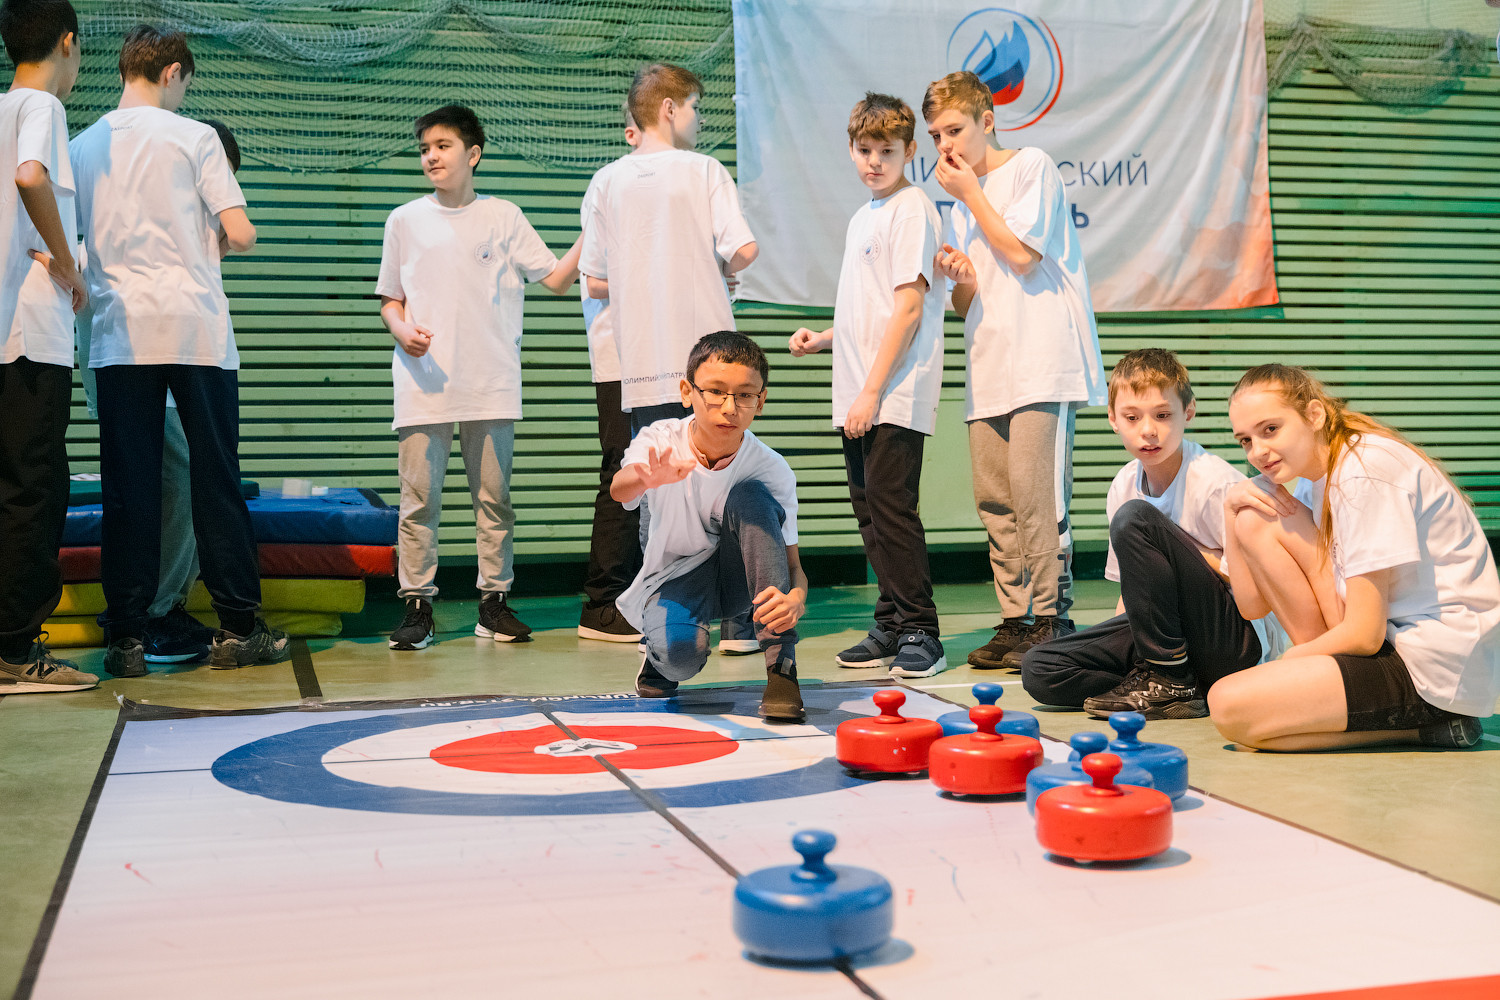 The children had the chance to try out Olympic sports such as curling ©ROC